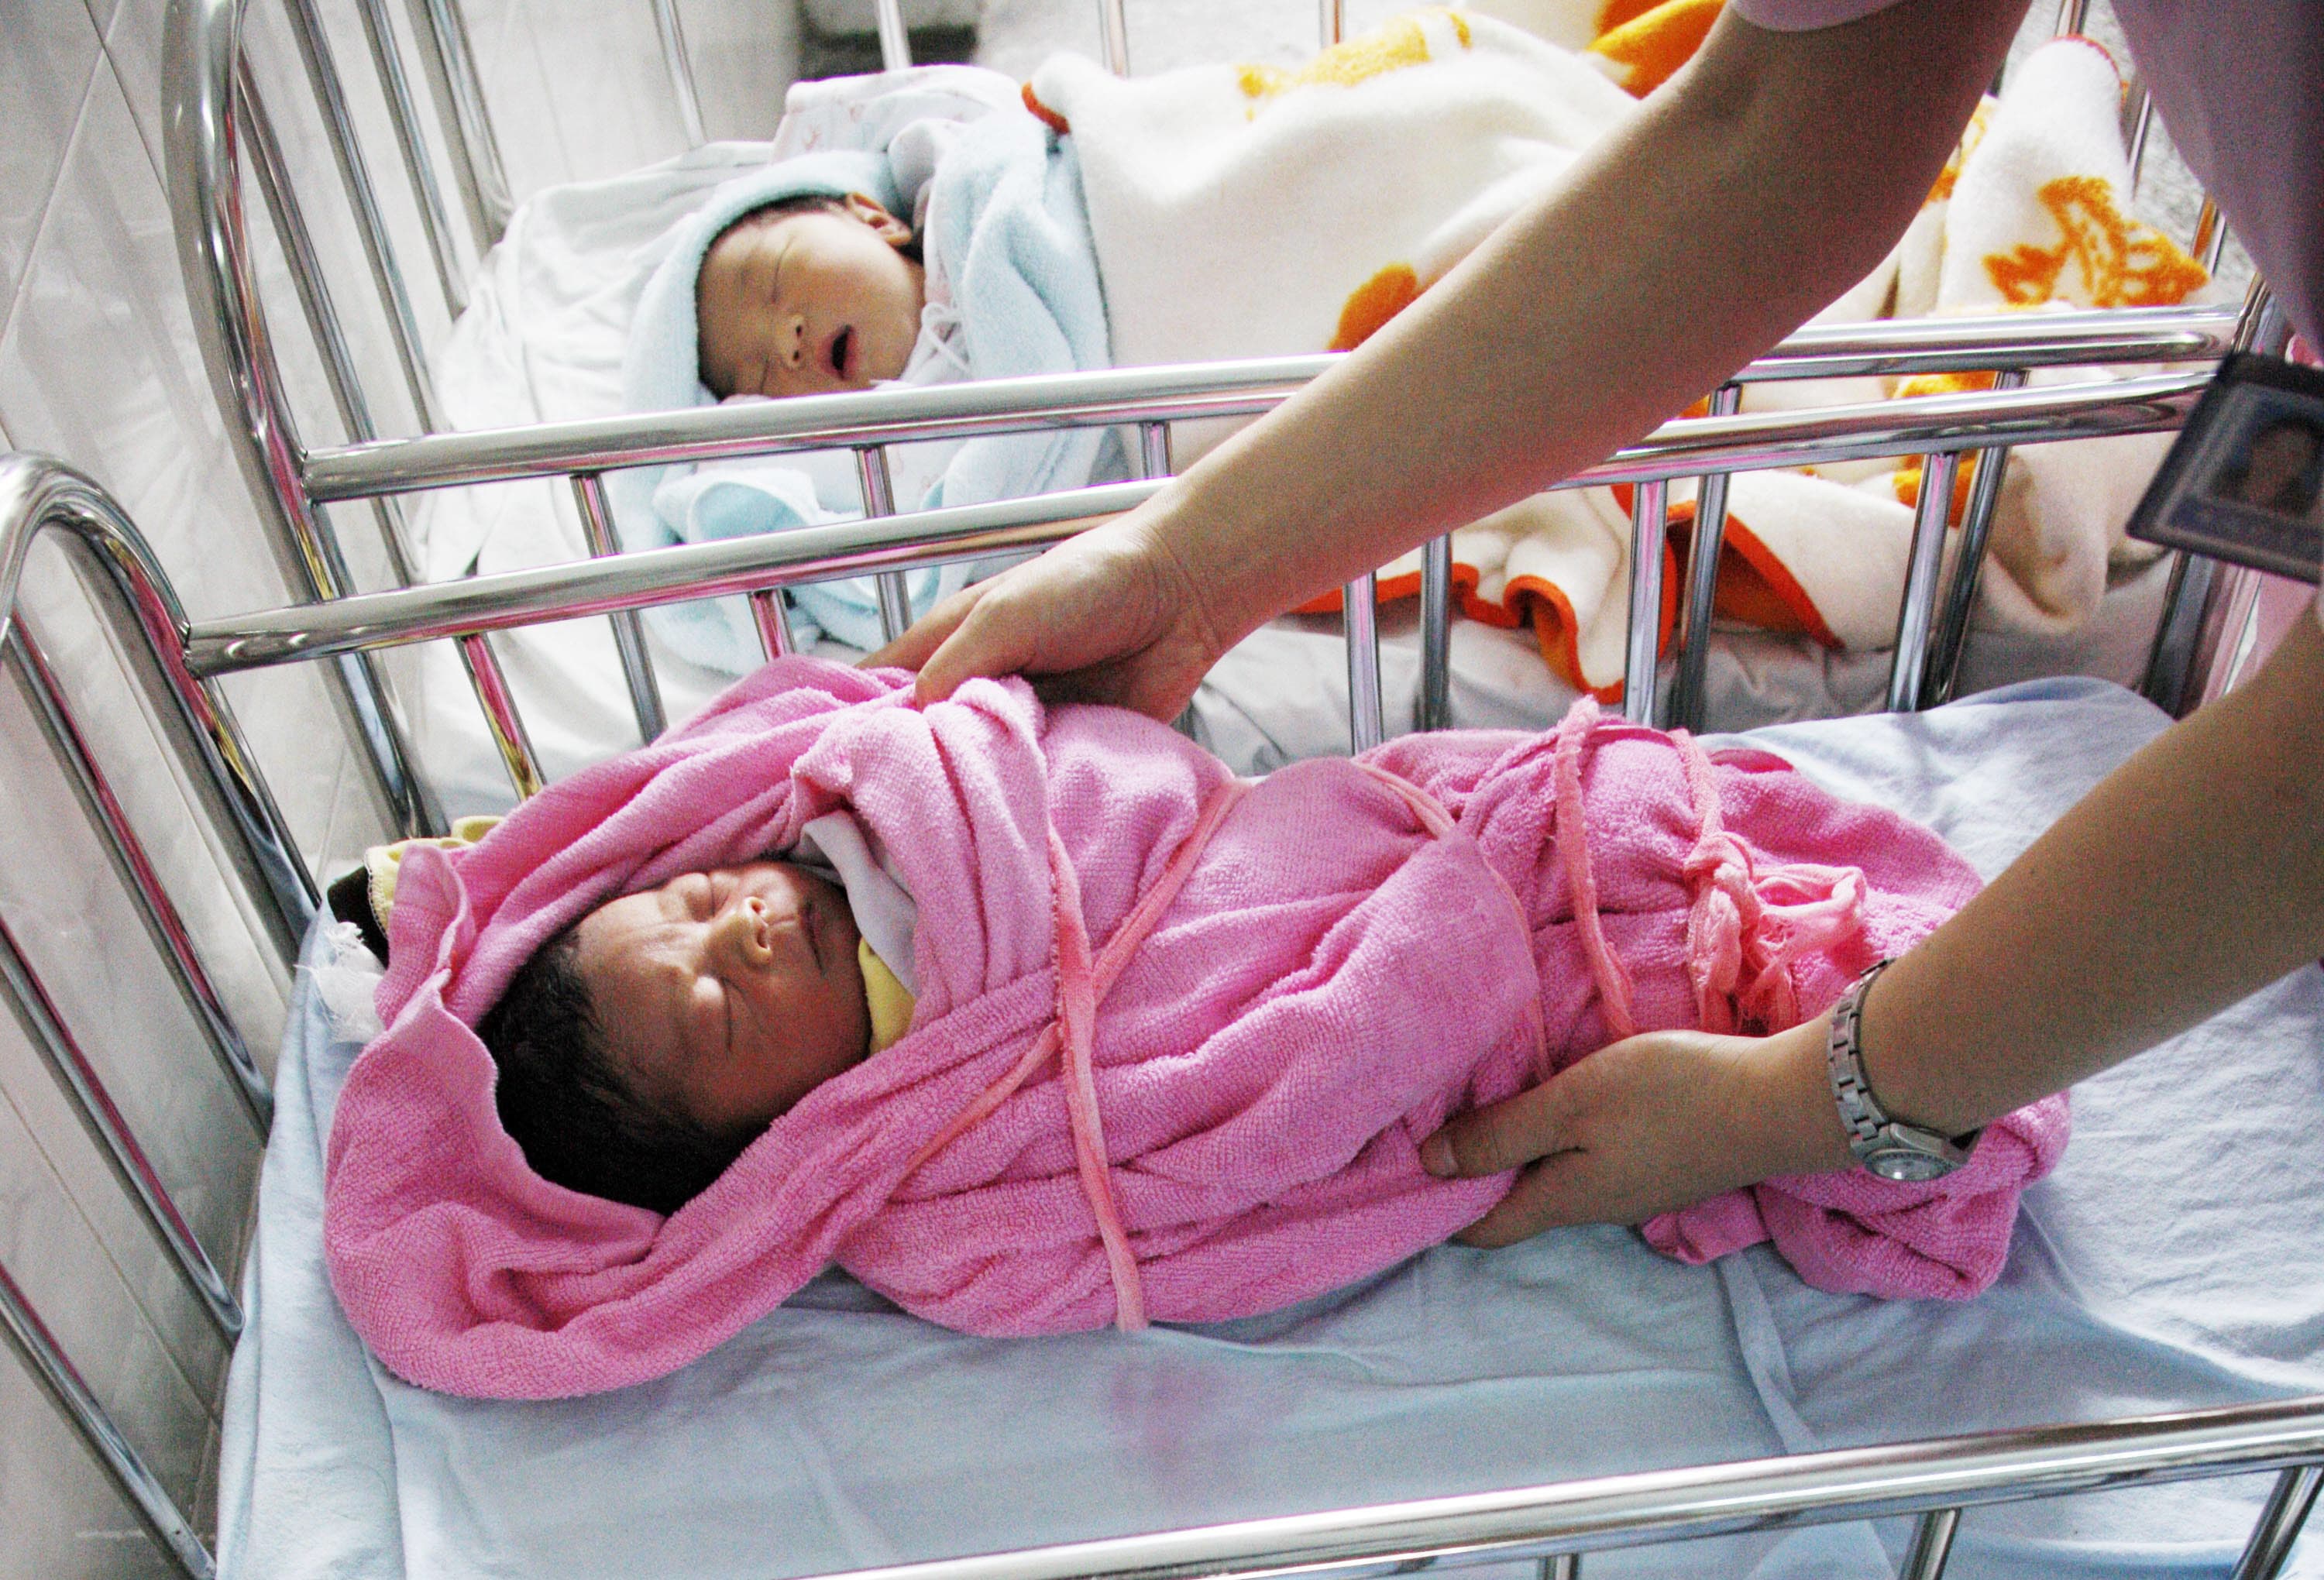 This file picture taken on July 5, 2010 shows a Chinese nurse attending to several newly-born babies at a hospital in Huaibei, east China's Anhui province.